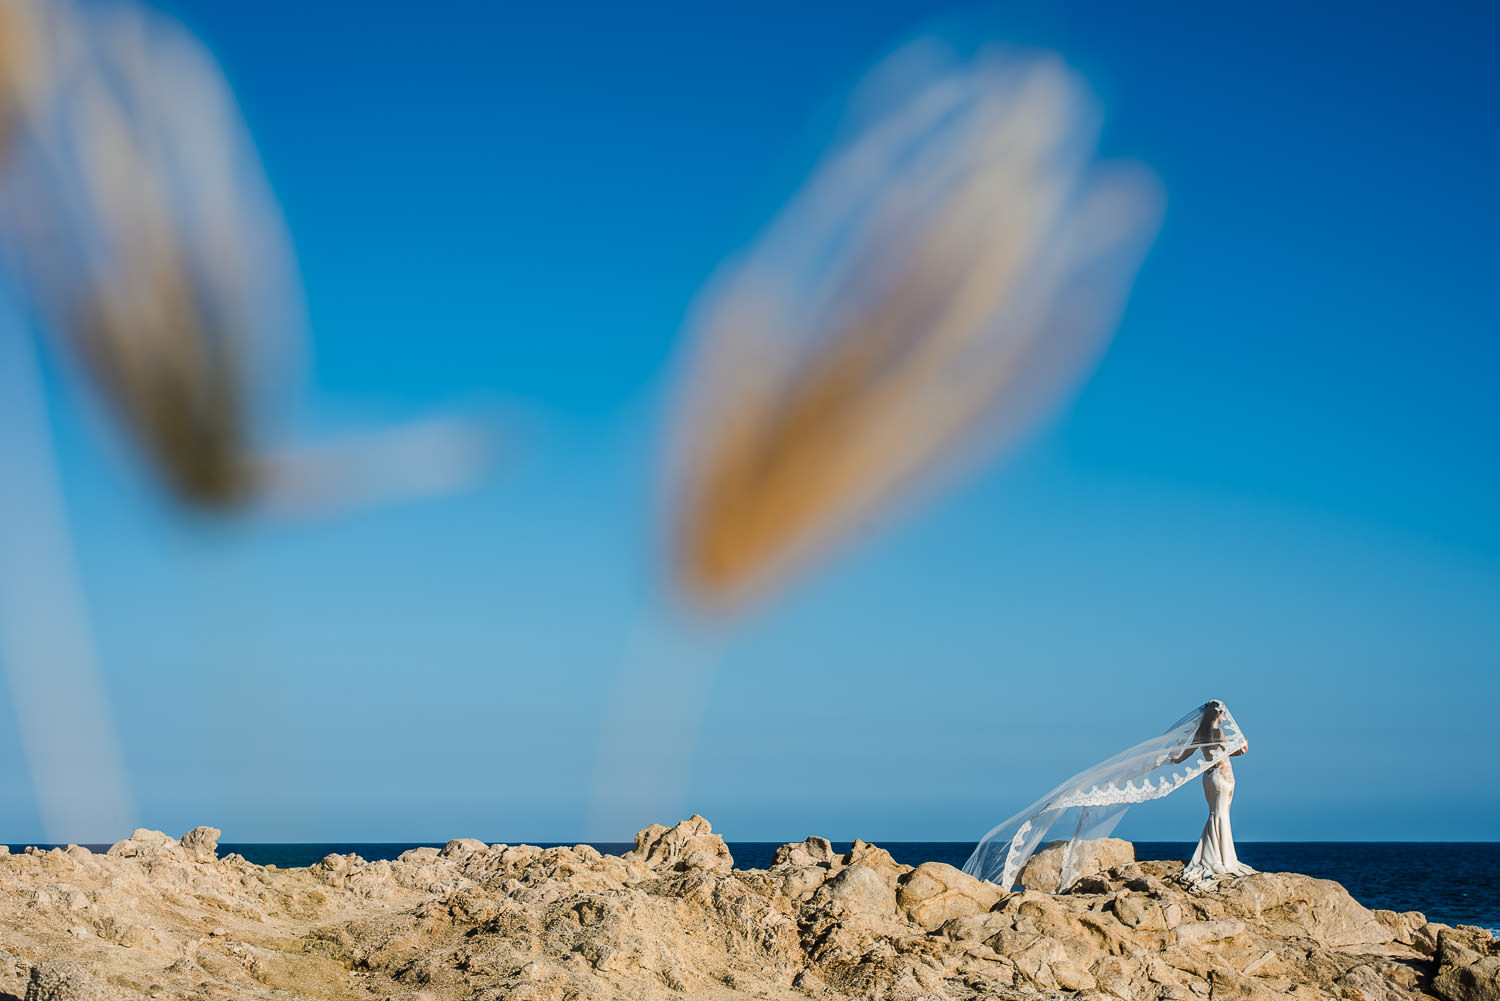 Bride with an amazing veil in fron of the Ocean